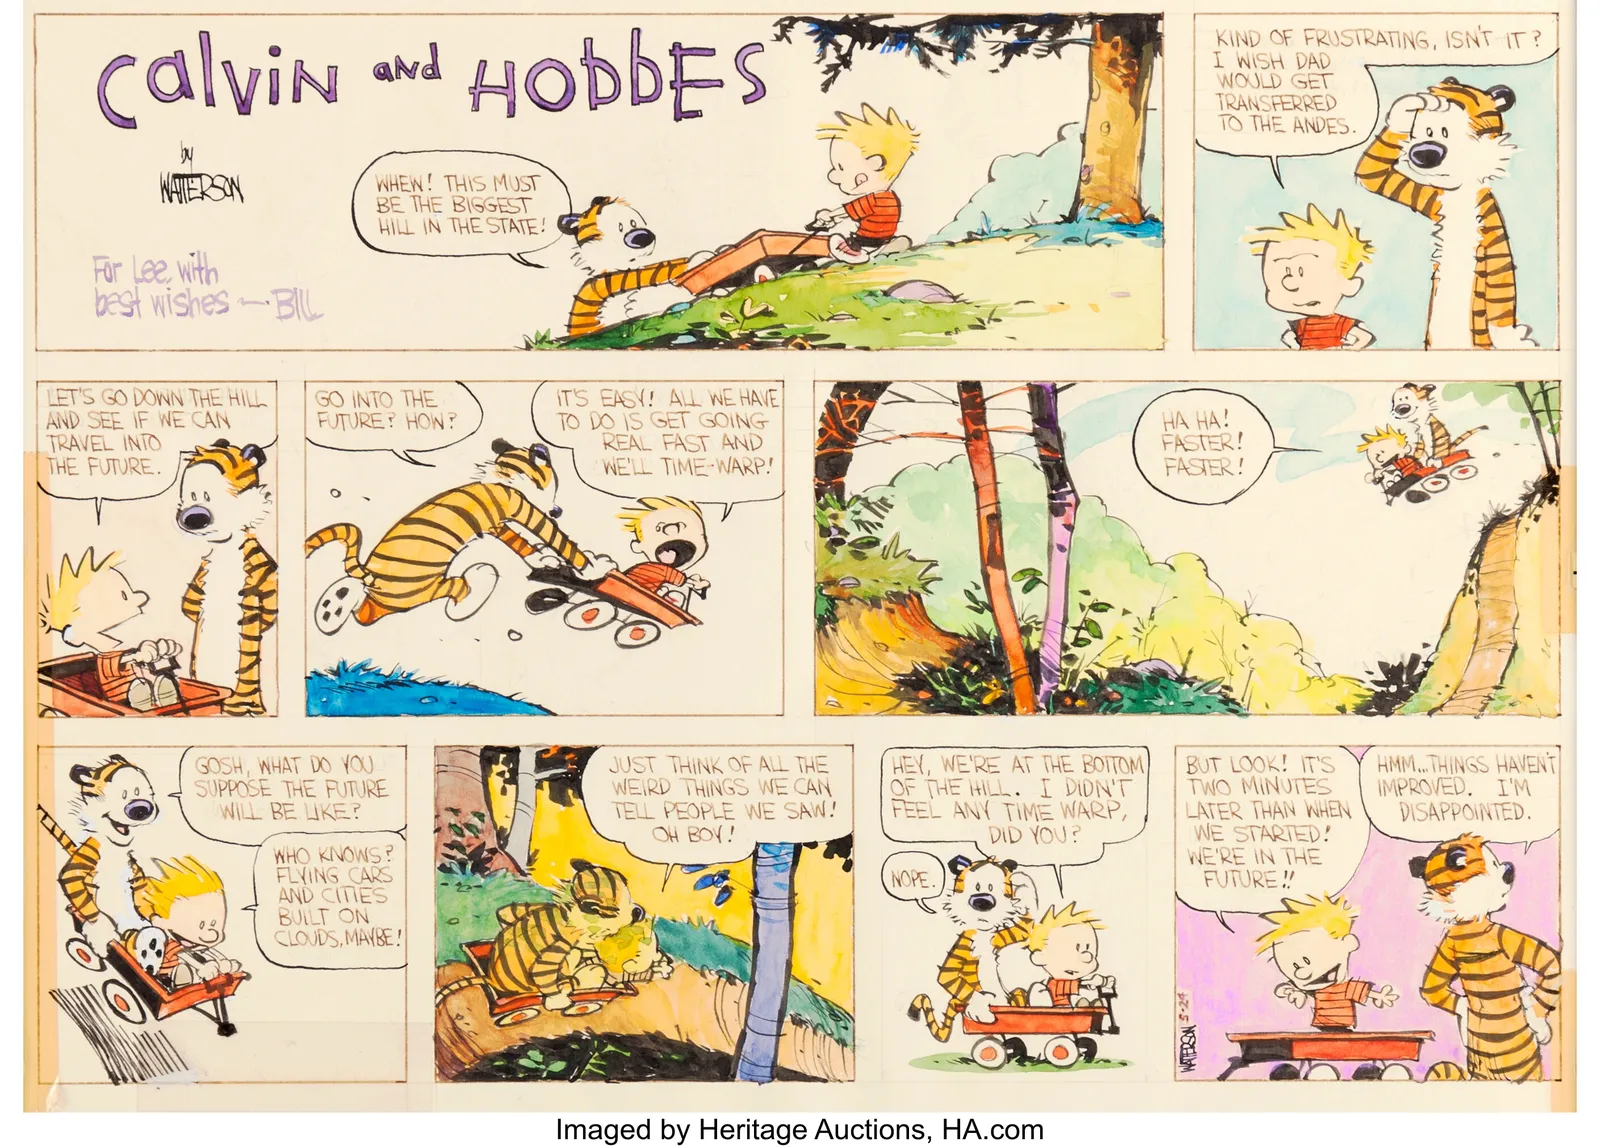 Hand-Colored 'Calvin and Hobbes' Strip Sells for $480,000 | Smart News|  Smithsonian Magazine